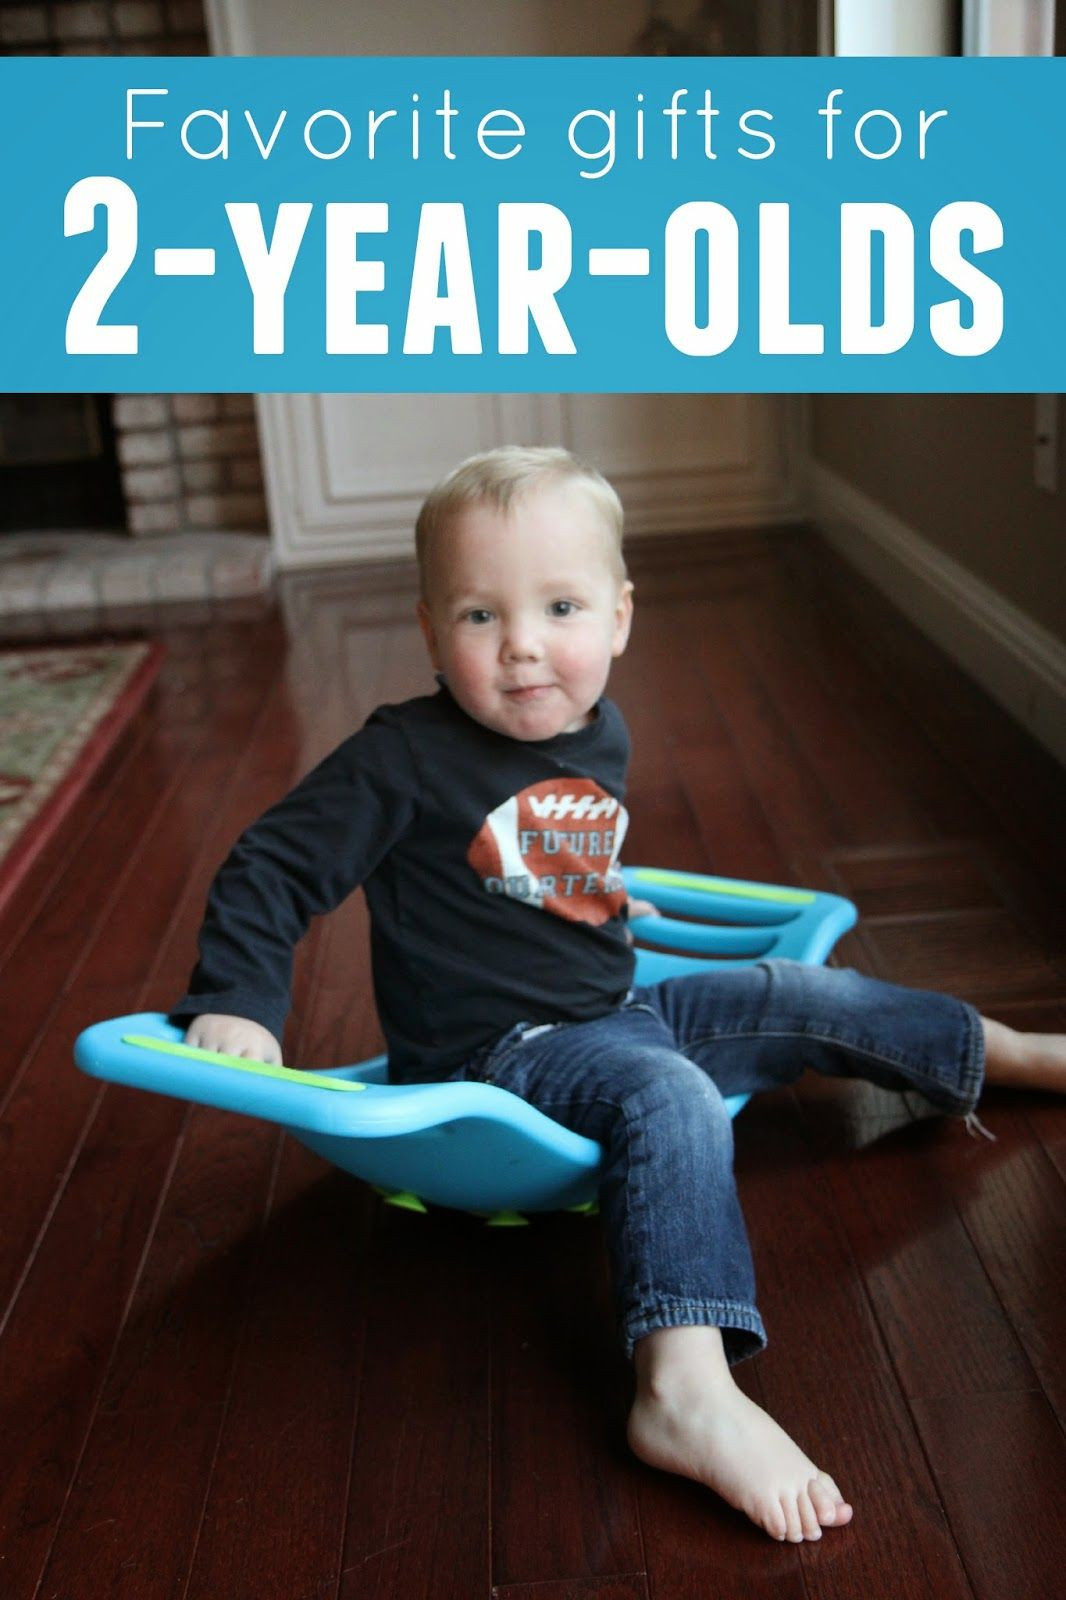 Toddler Boy Birthday Gift Ideas
 Favorite Gifts for 2 Year Olds